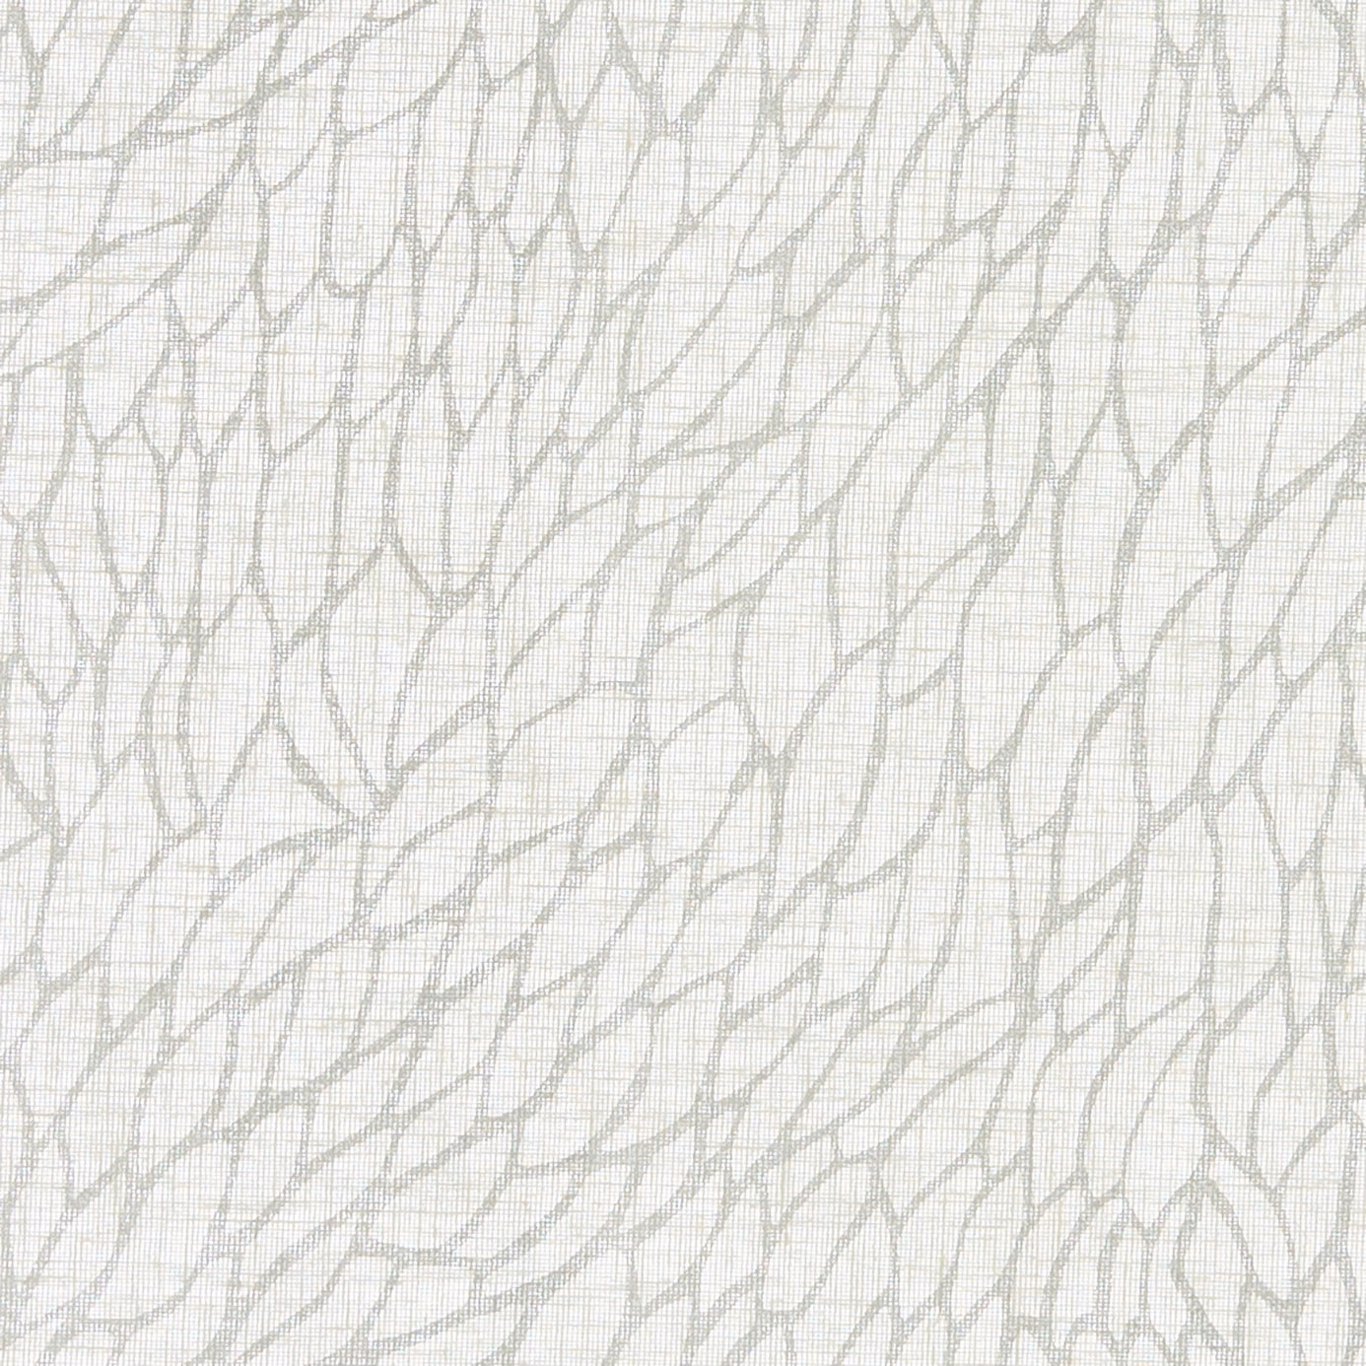 Corallino Sheer Chalk/Silver Fabric by CNC